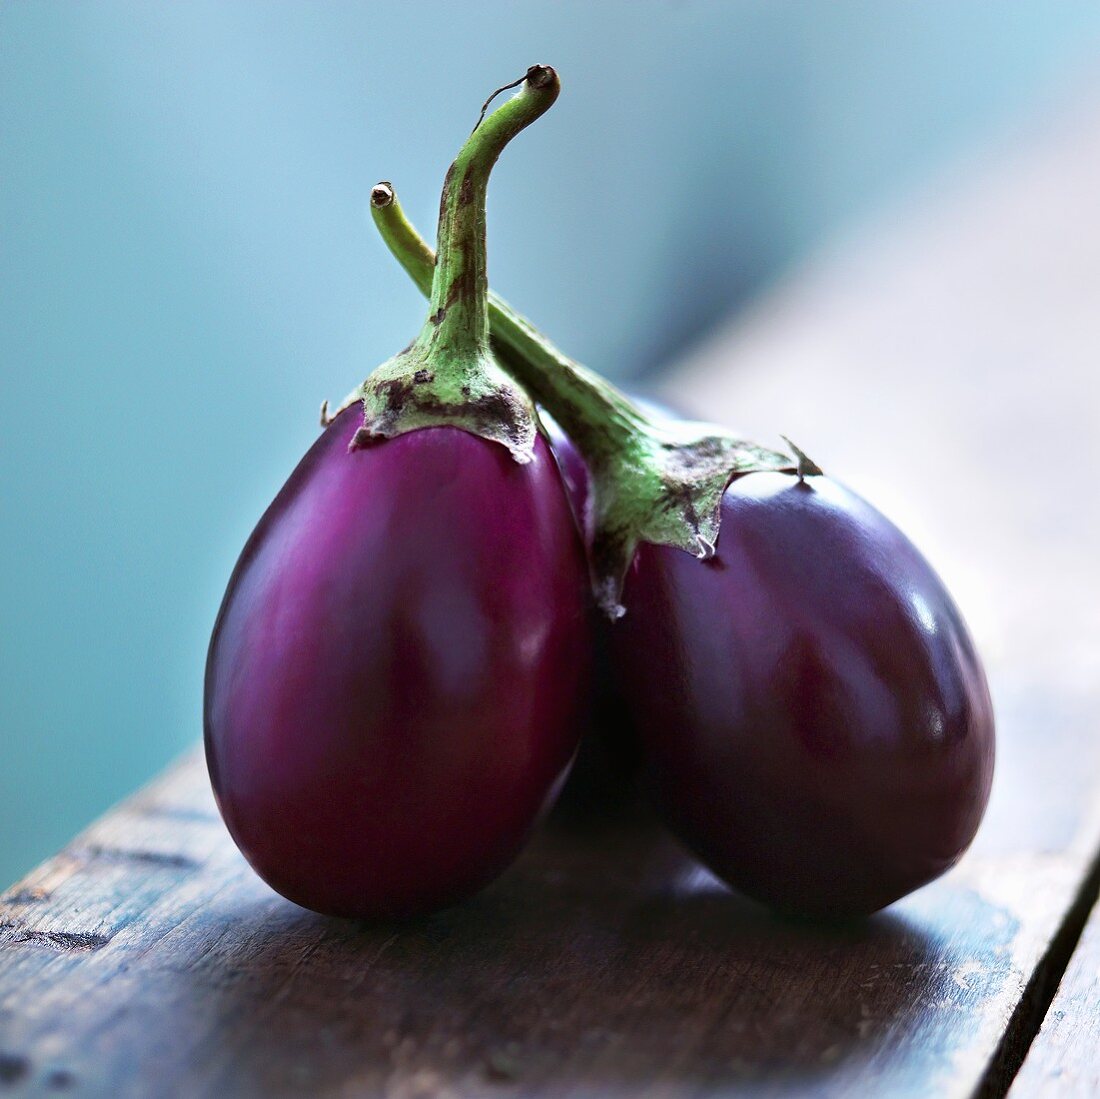 Small Group of Eggplants on Wooden Table